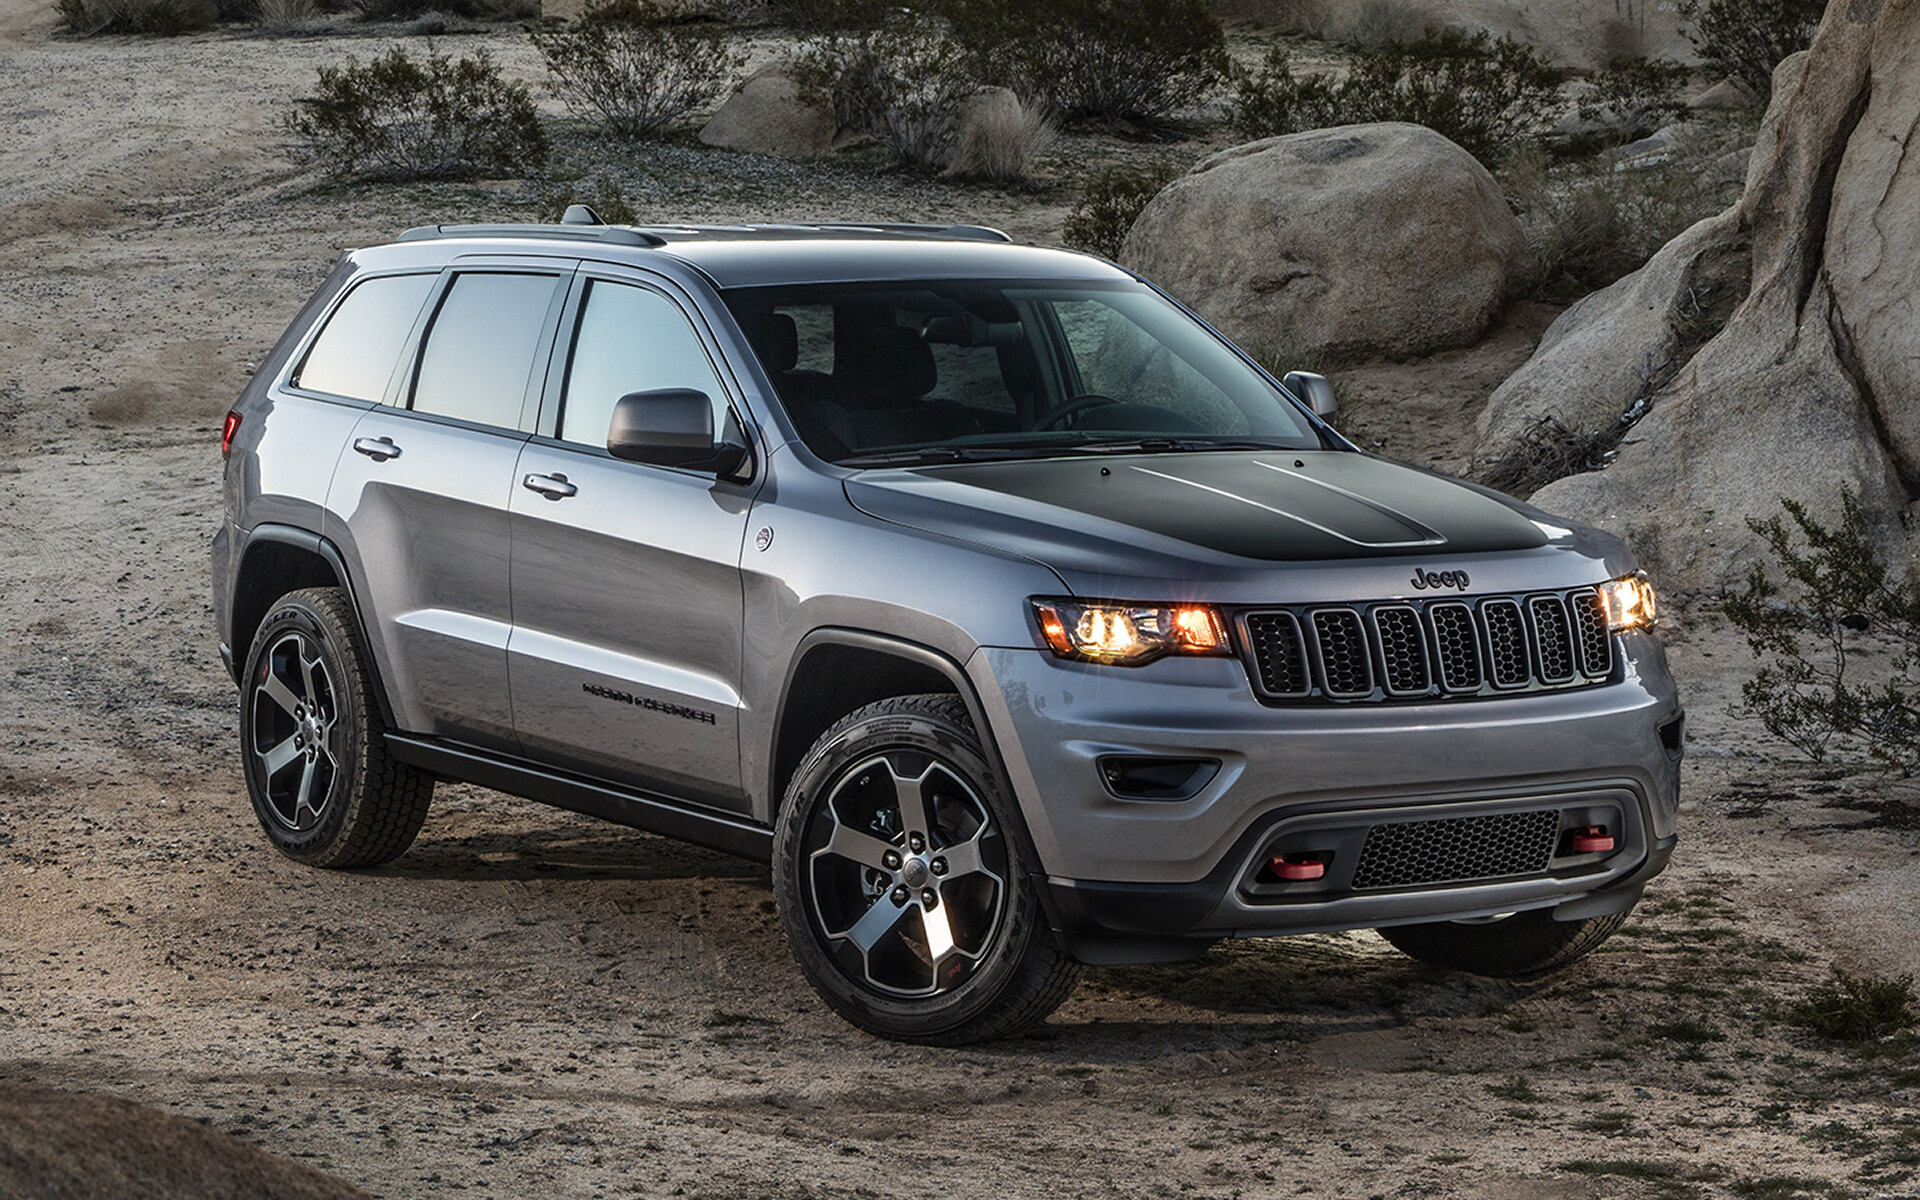 Jeep Grand Cherokee: The Trailhawk trim, The ultimate off-road version, Proven Trail Rated capability. 1920x1200 HD Background.